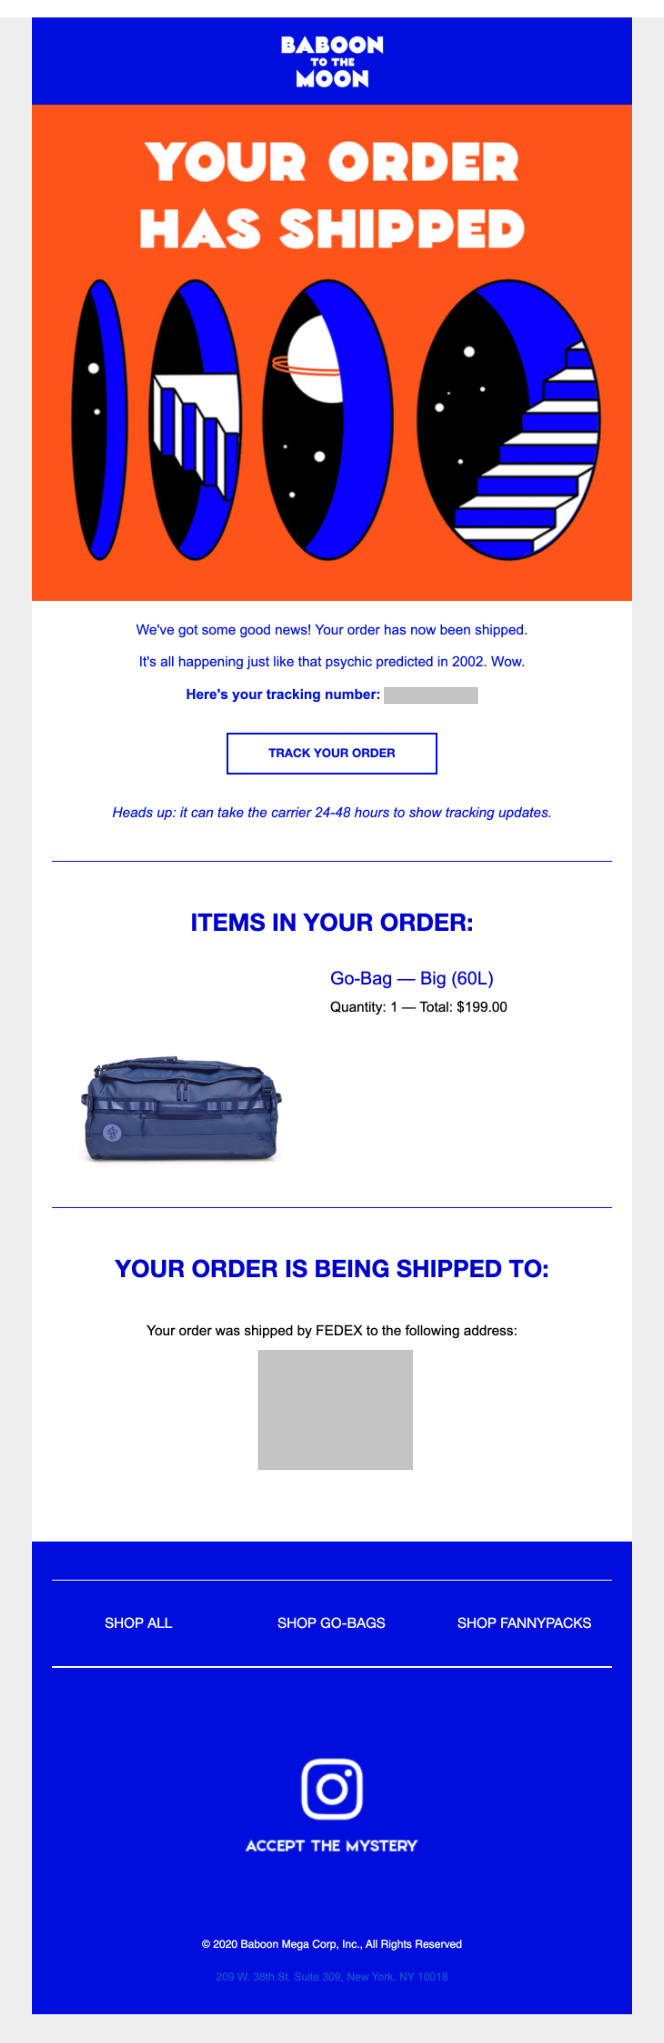 Baboon to the Moon Shipment Confirmation Email Template screenshot